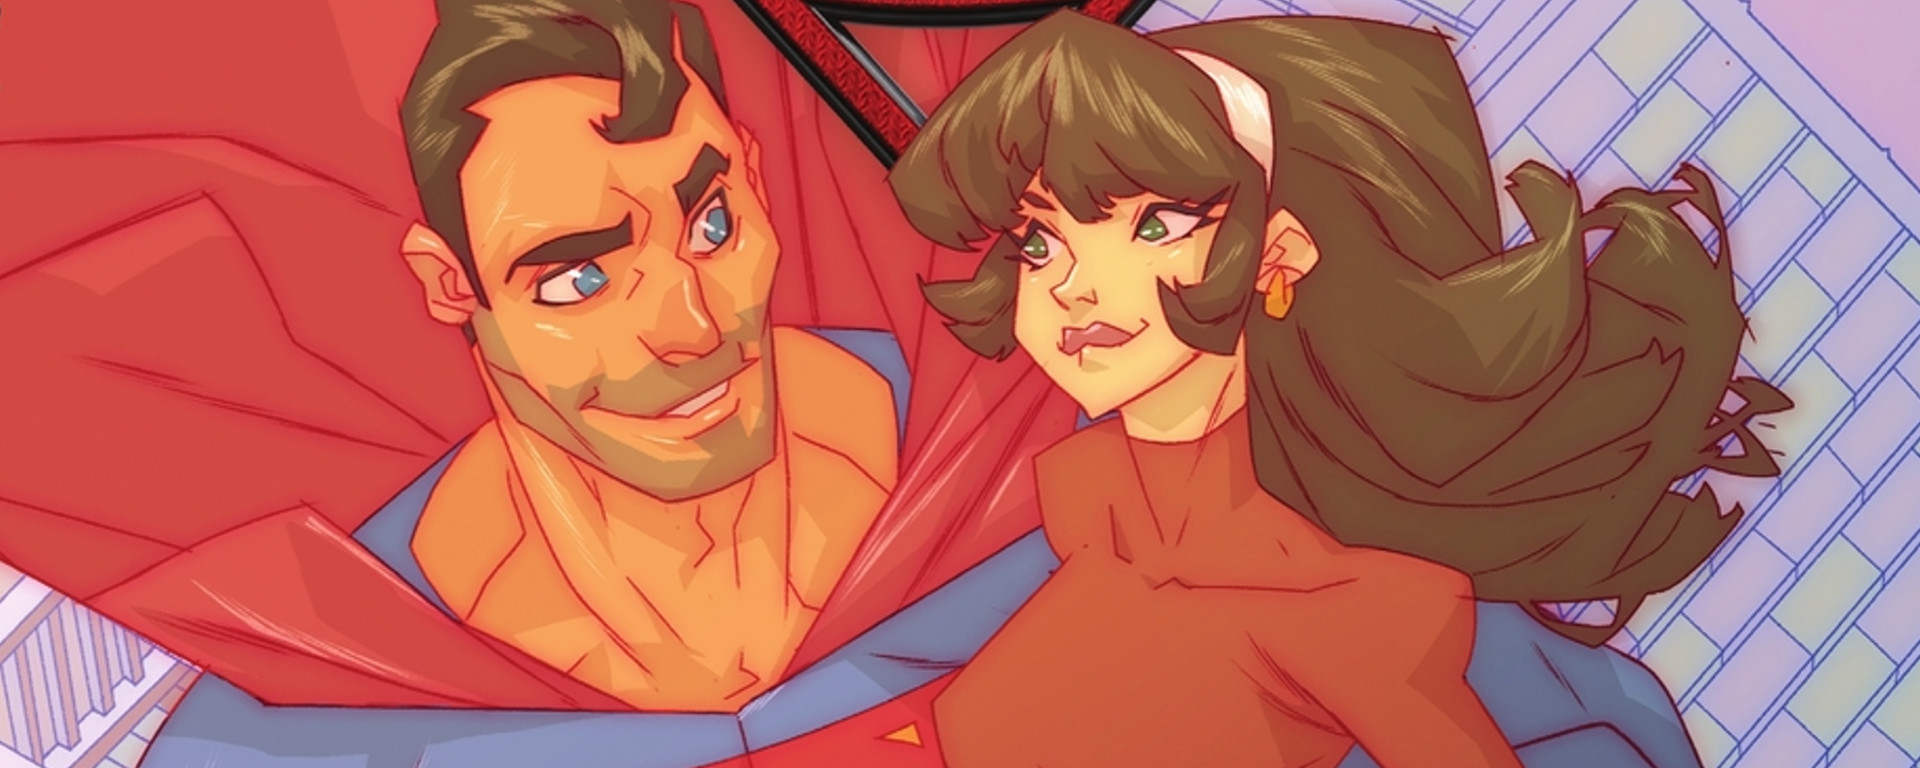 Earth-Prime Superman and Lois #2 Header